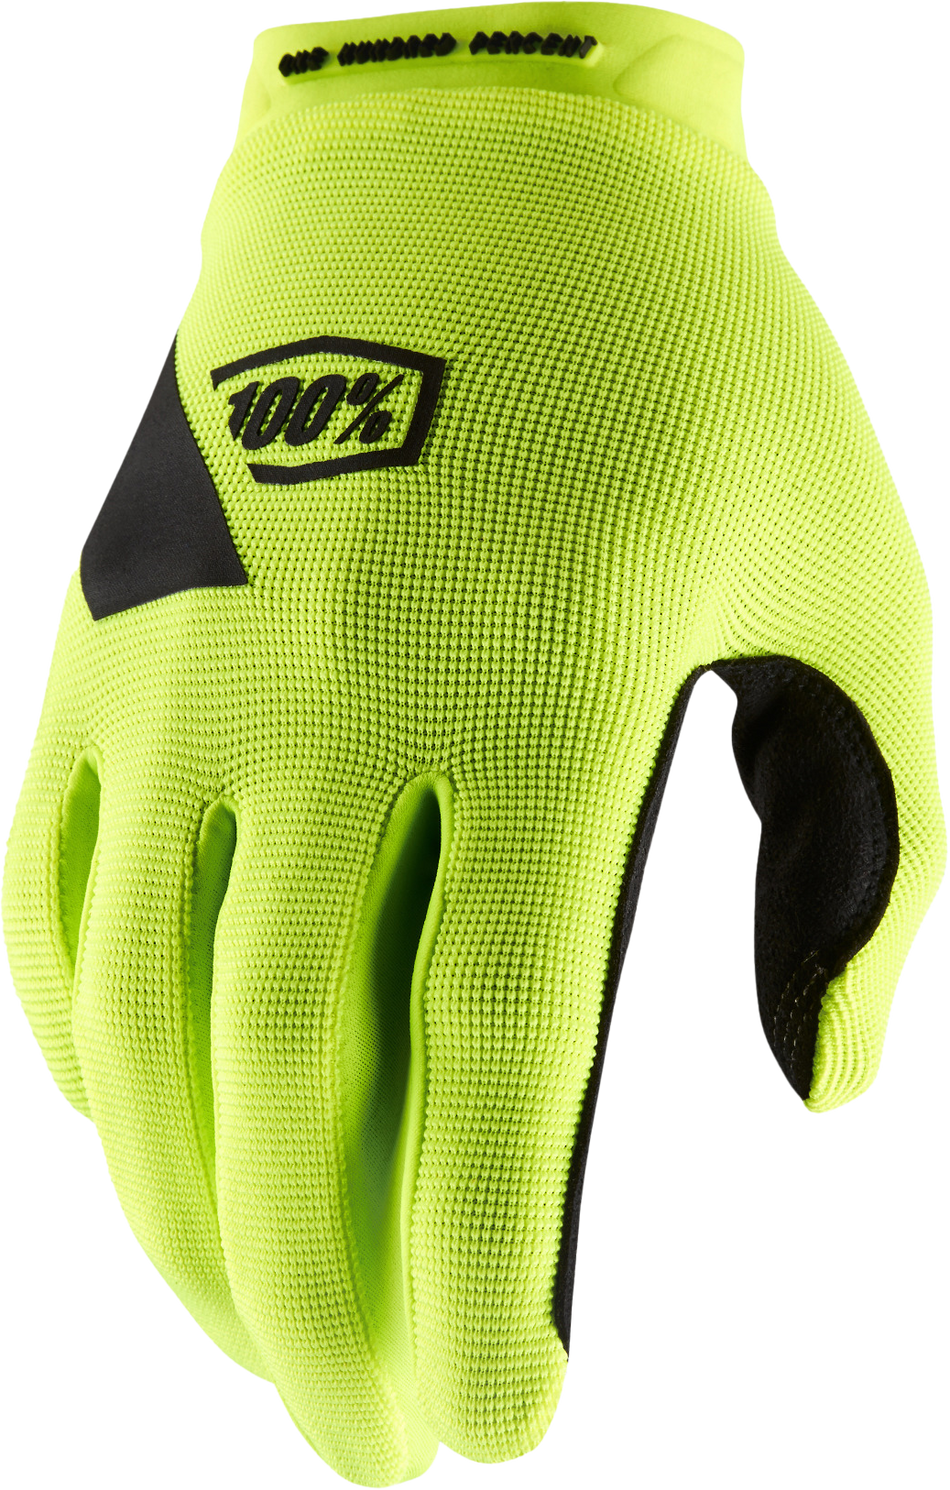 100% Ridecamp Gloves Fluo Yellow Md 10011-00011